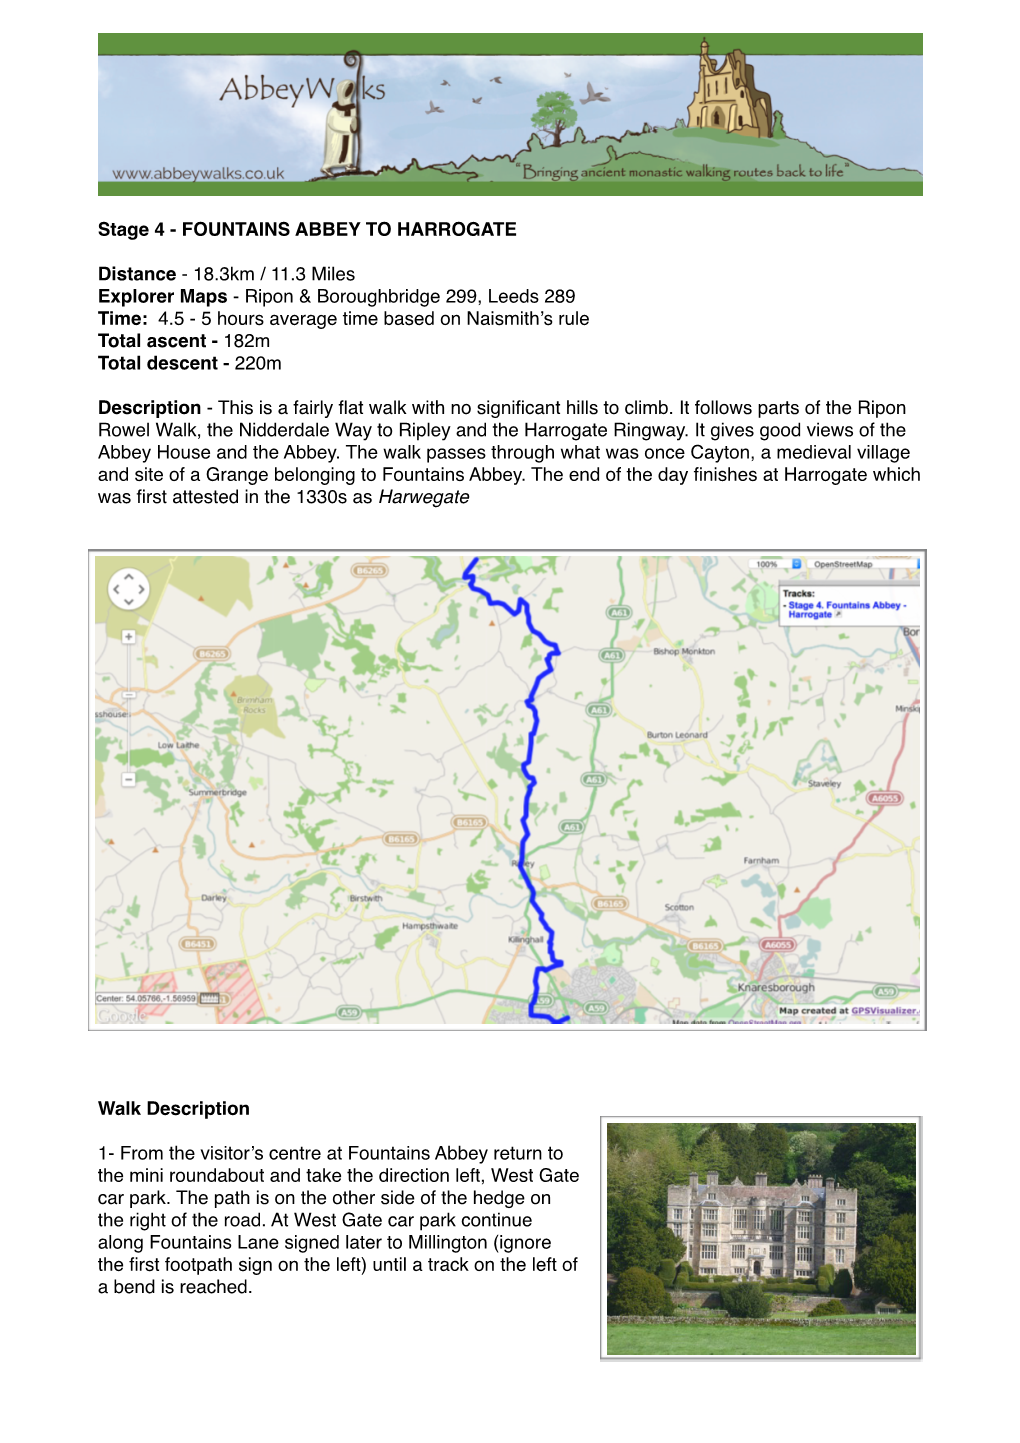 Stage 4 FOUNTAINS ABBEY to HARROGATE